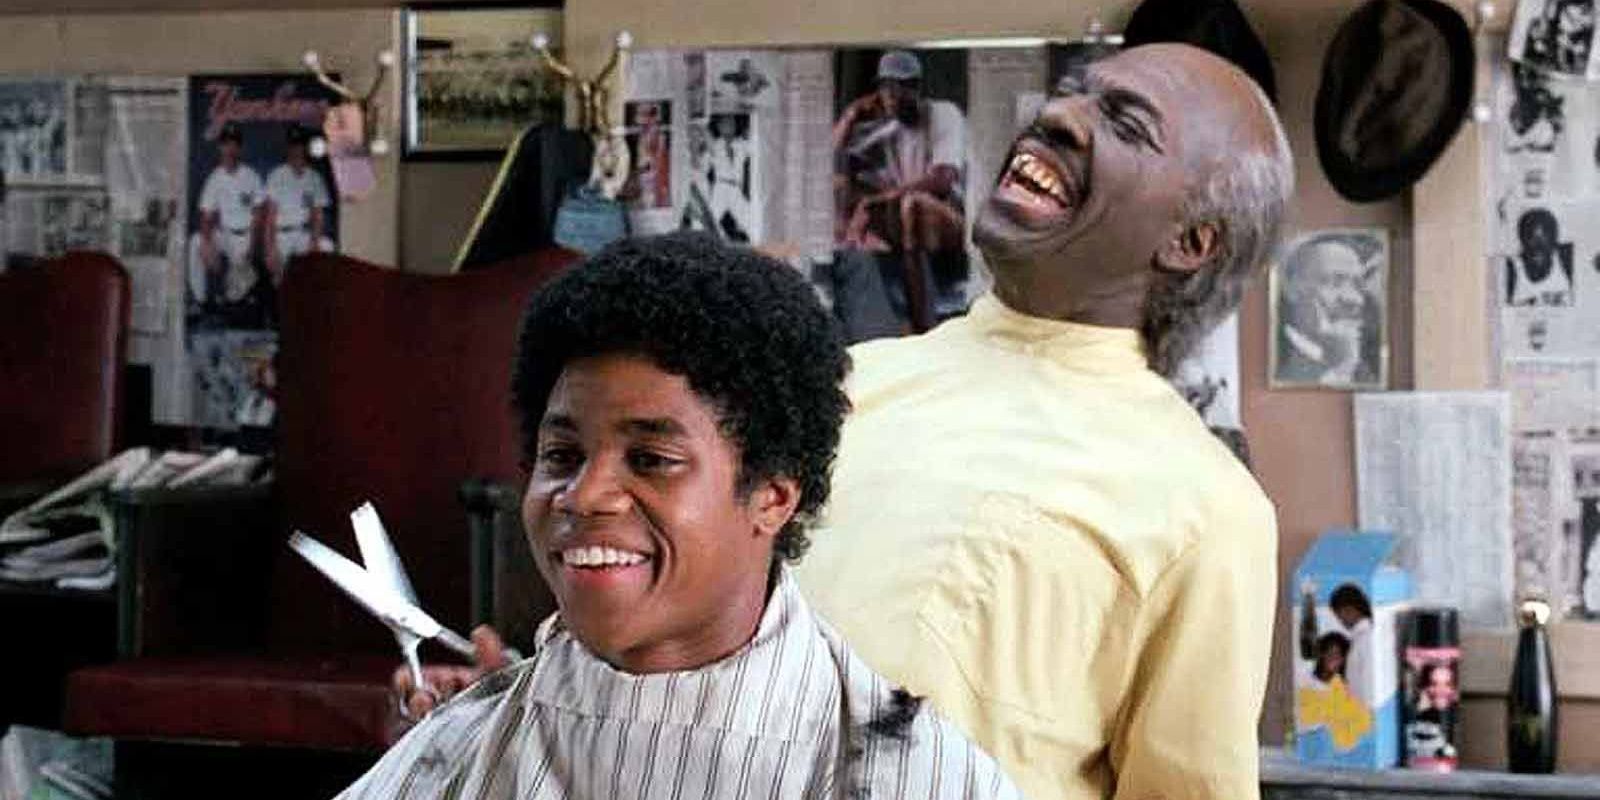 Cuba Gooding Jr. Gets his haircut in the barbershop in Coming To America